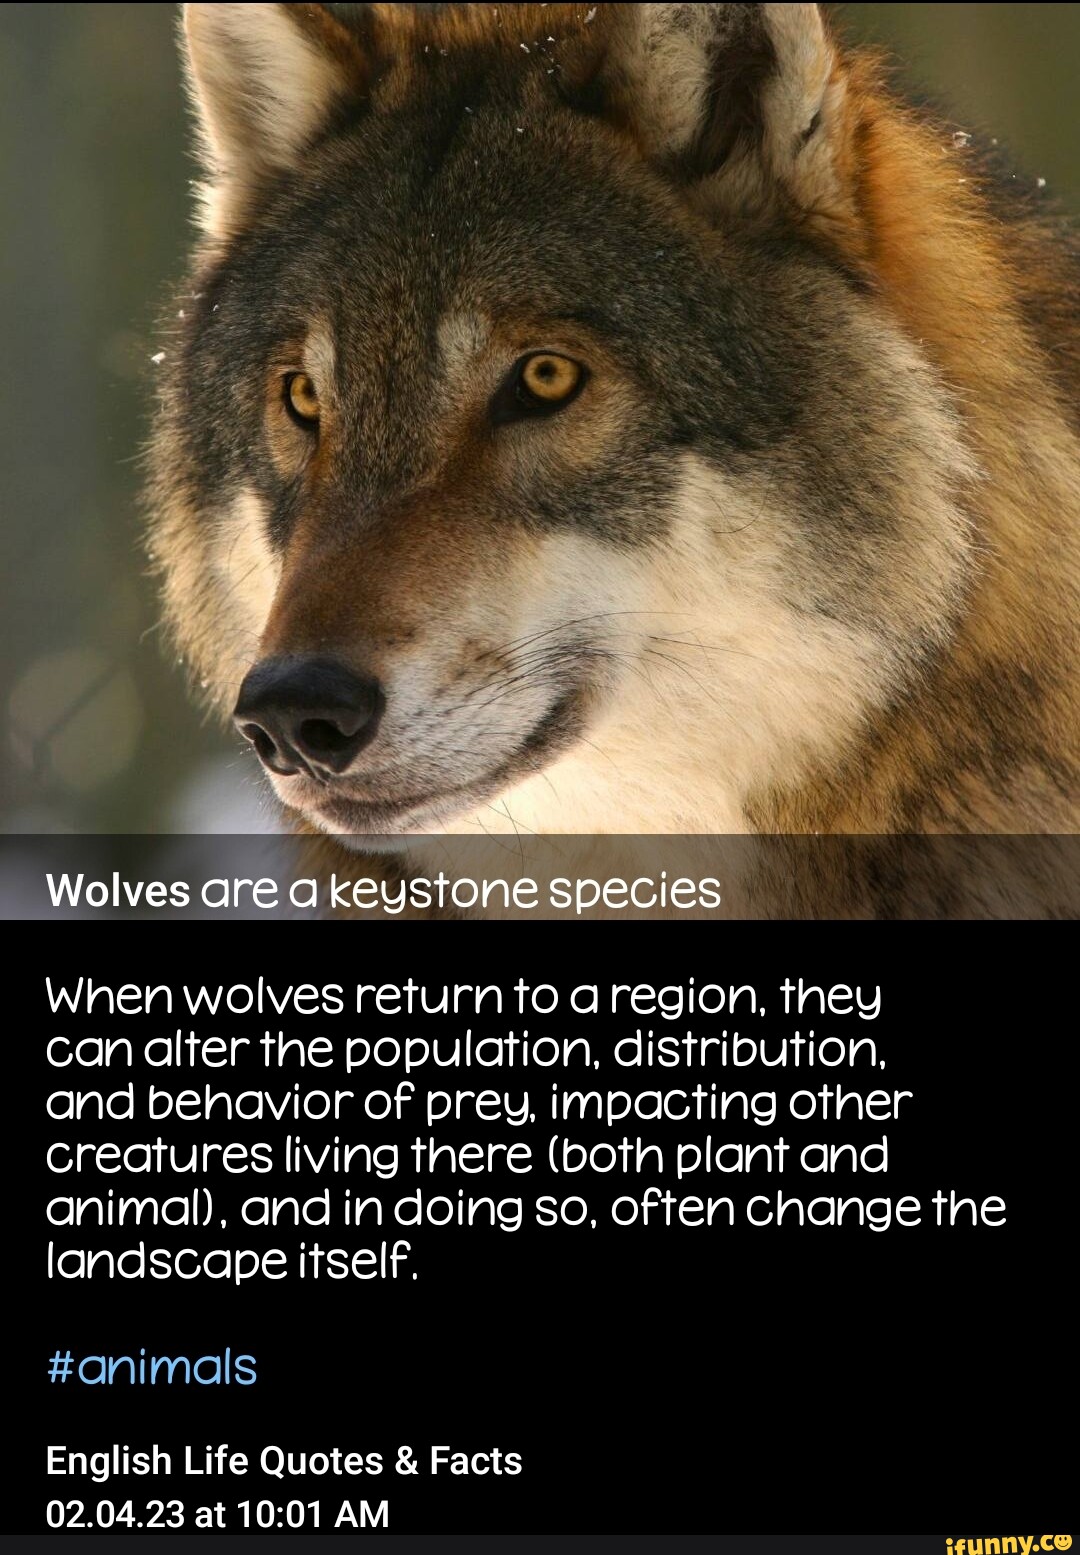 Keystone species, facts and photos